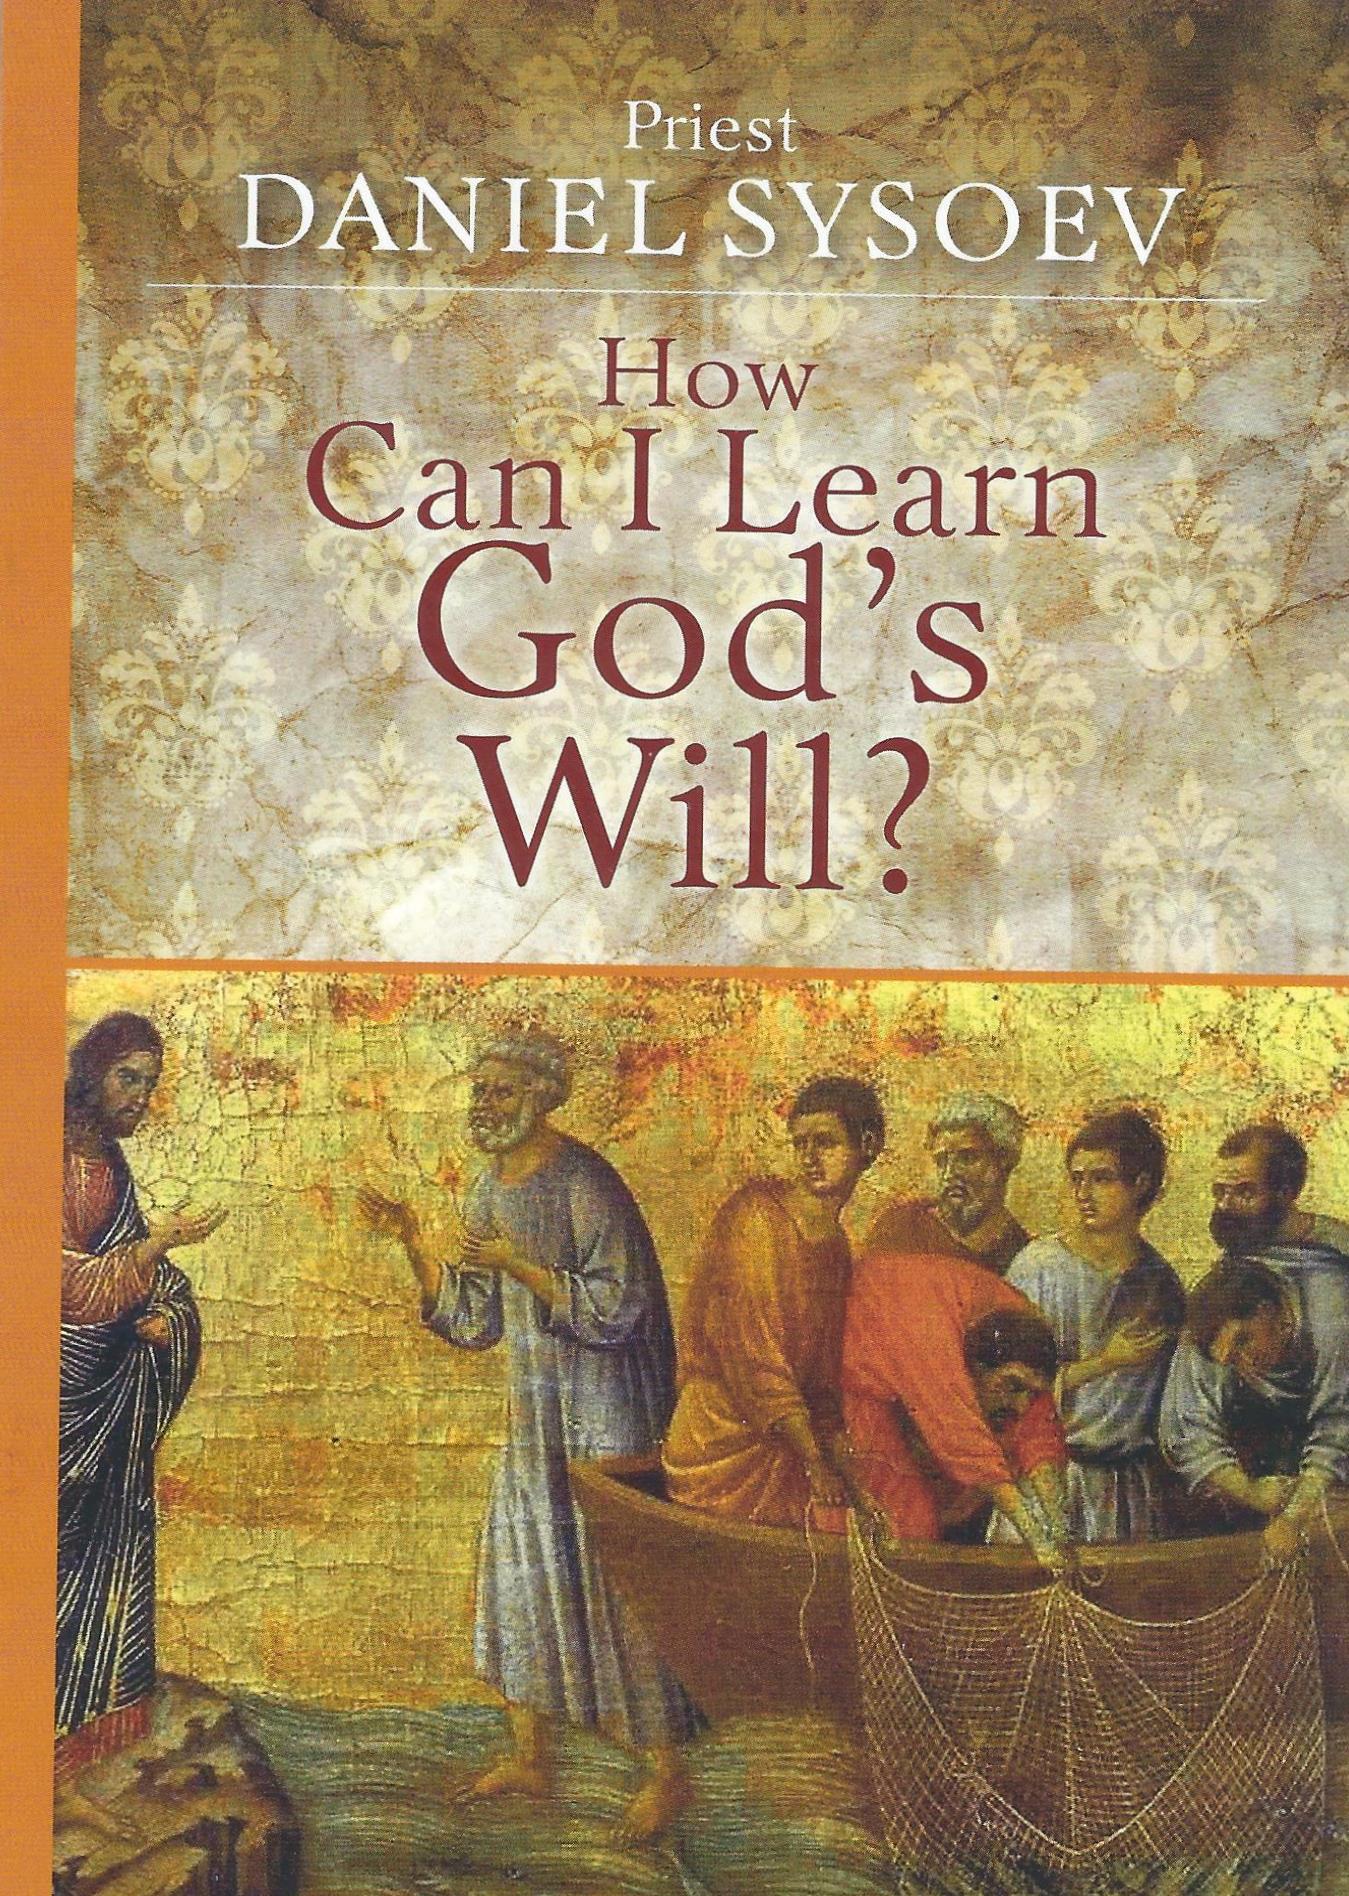 How Can I Learn God's Will?